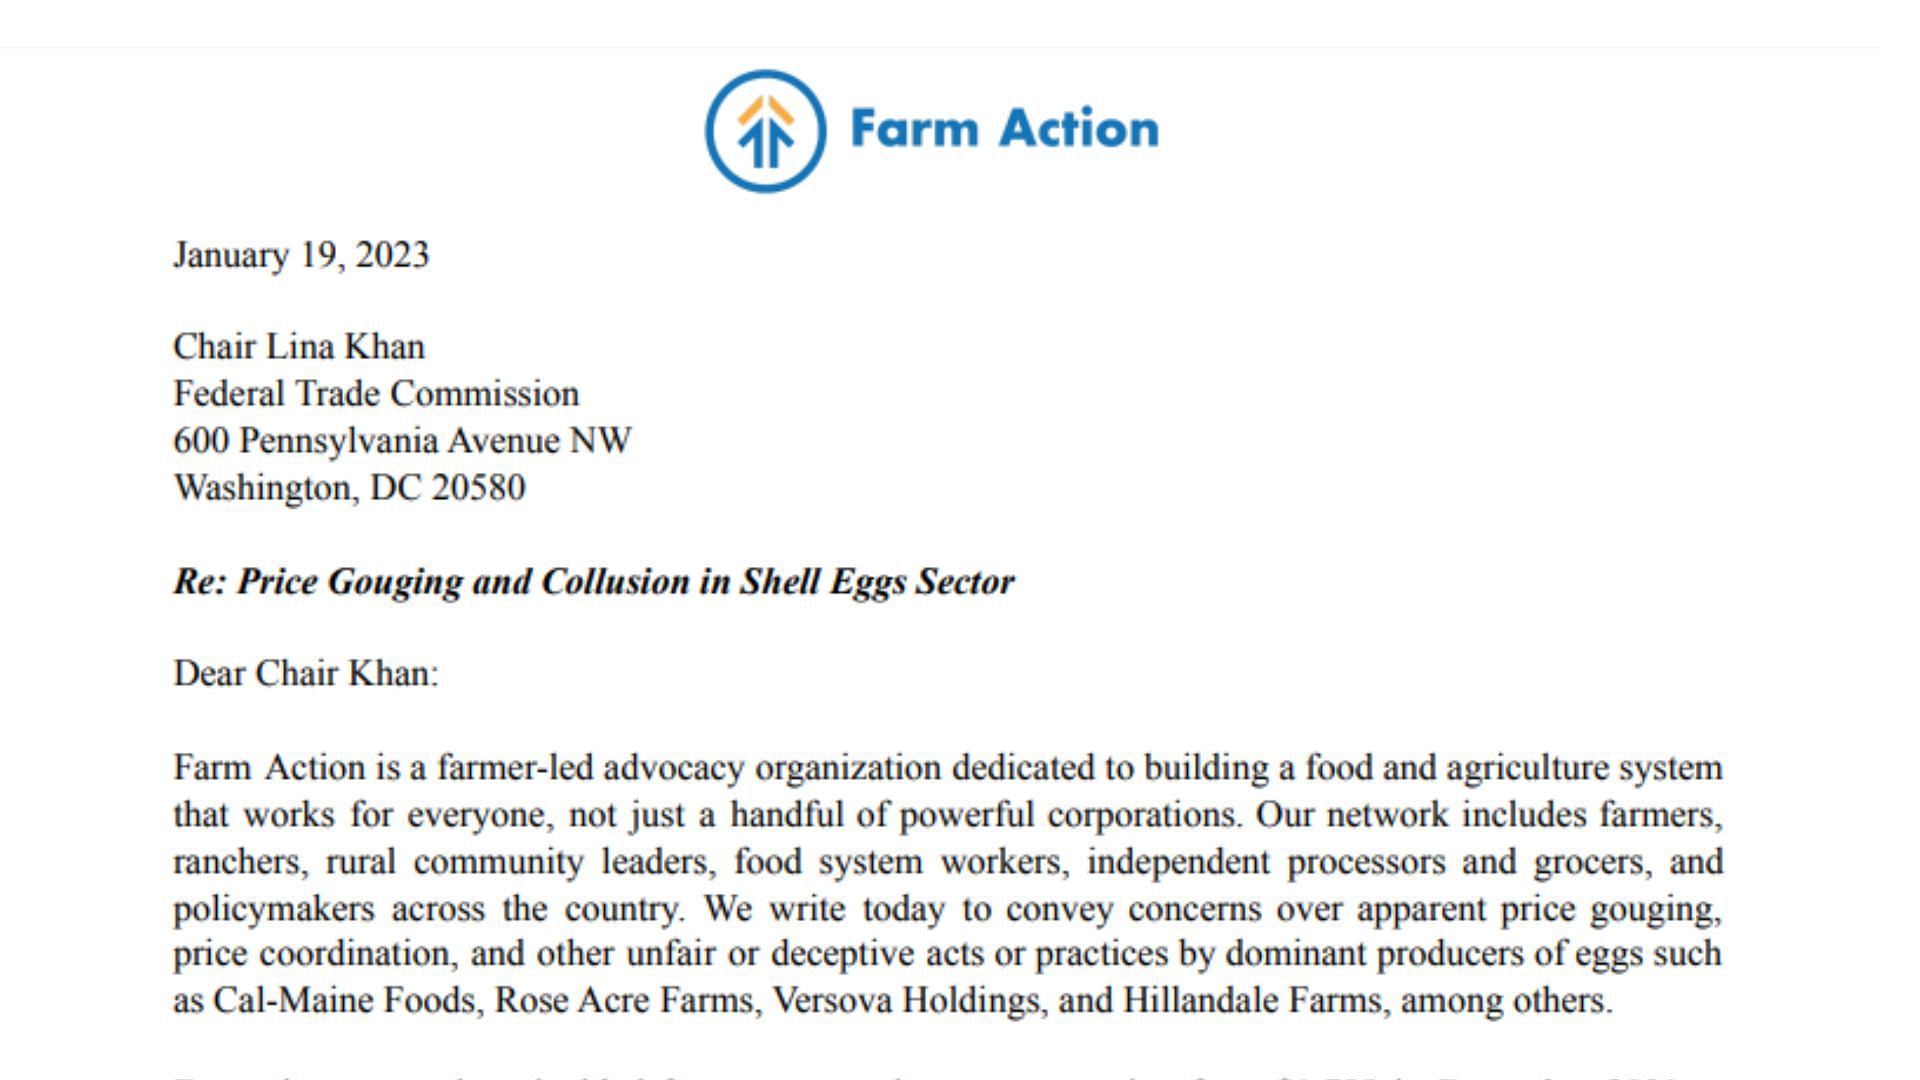 a snapshot of the letter addressed to FTC Chair Lina Khan regarding the exorbitant rise in egg prices and a chance of unfair play (Image via Farm Action)